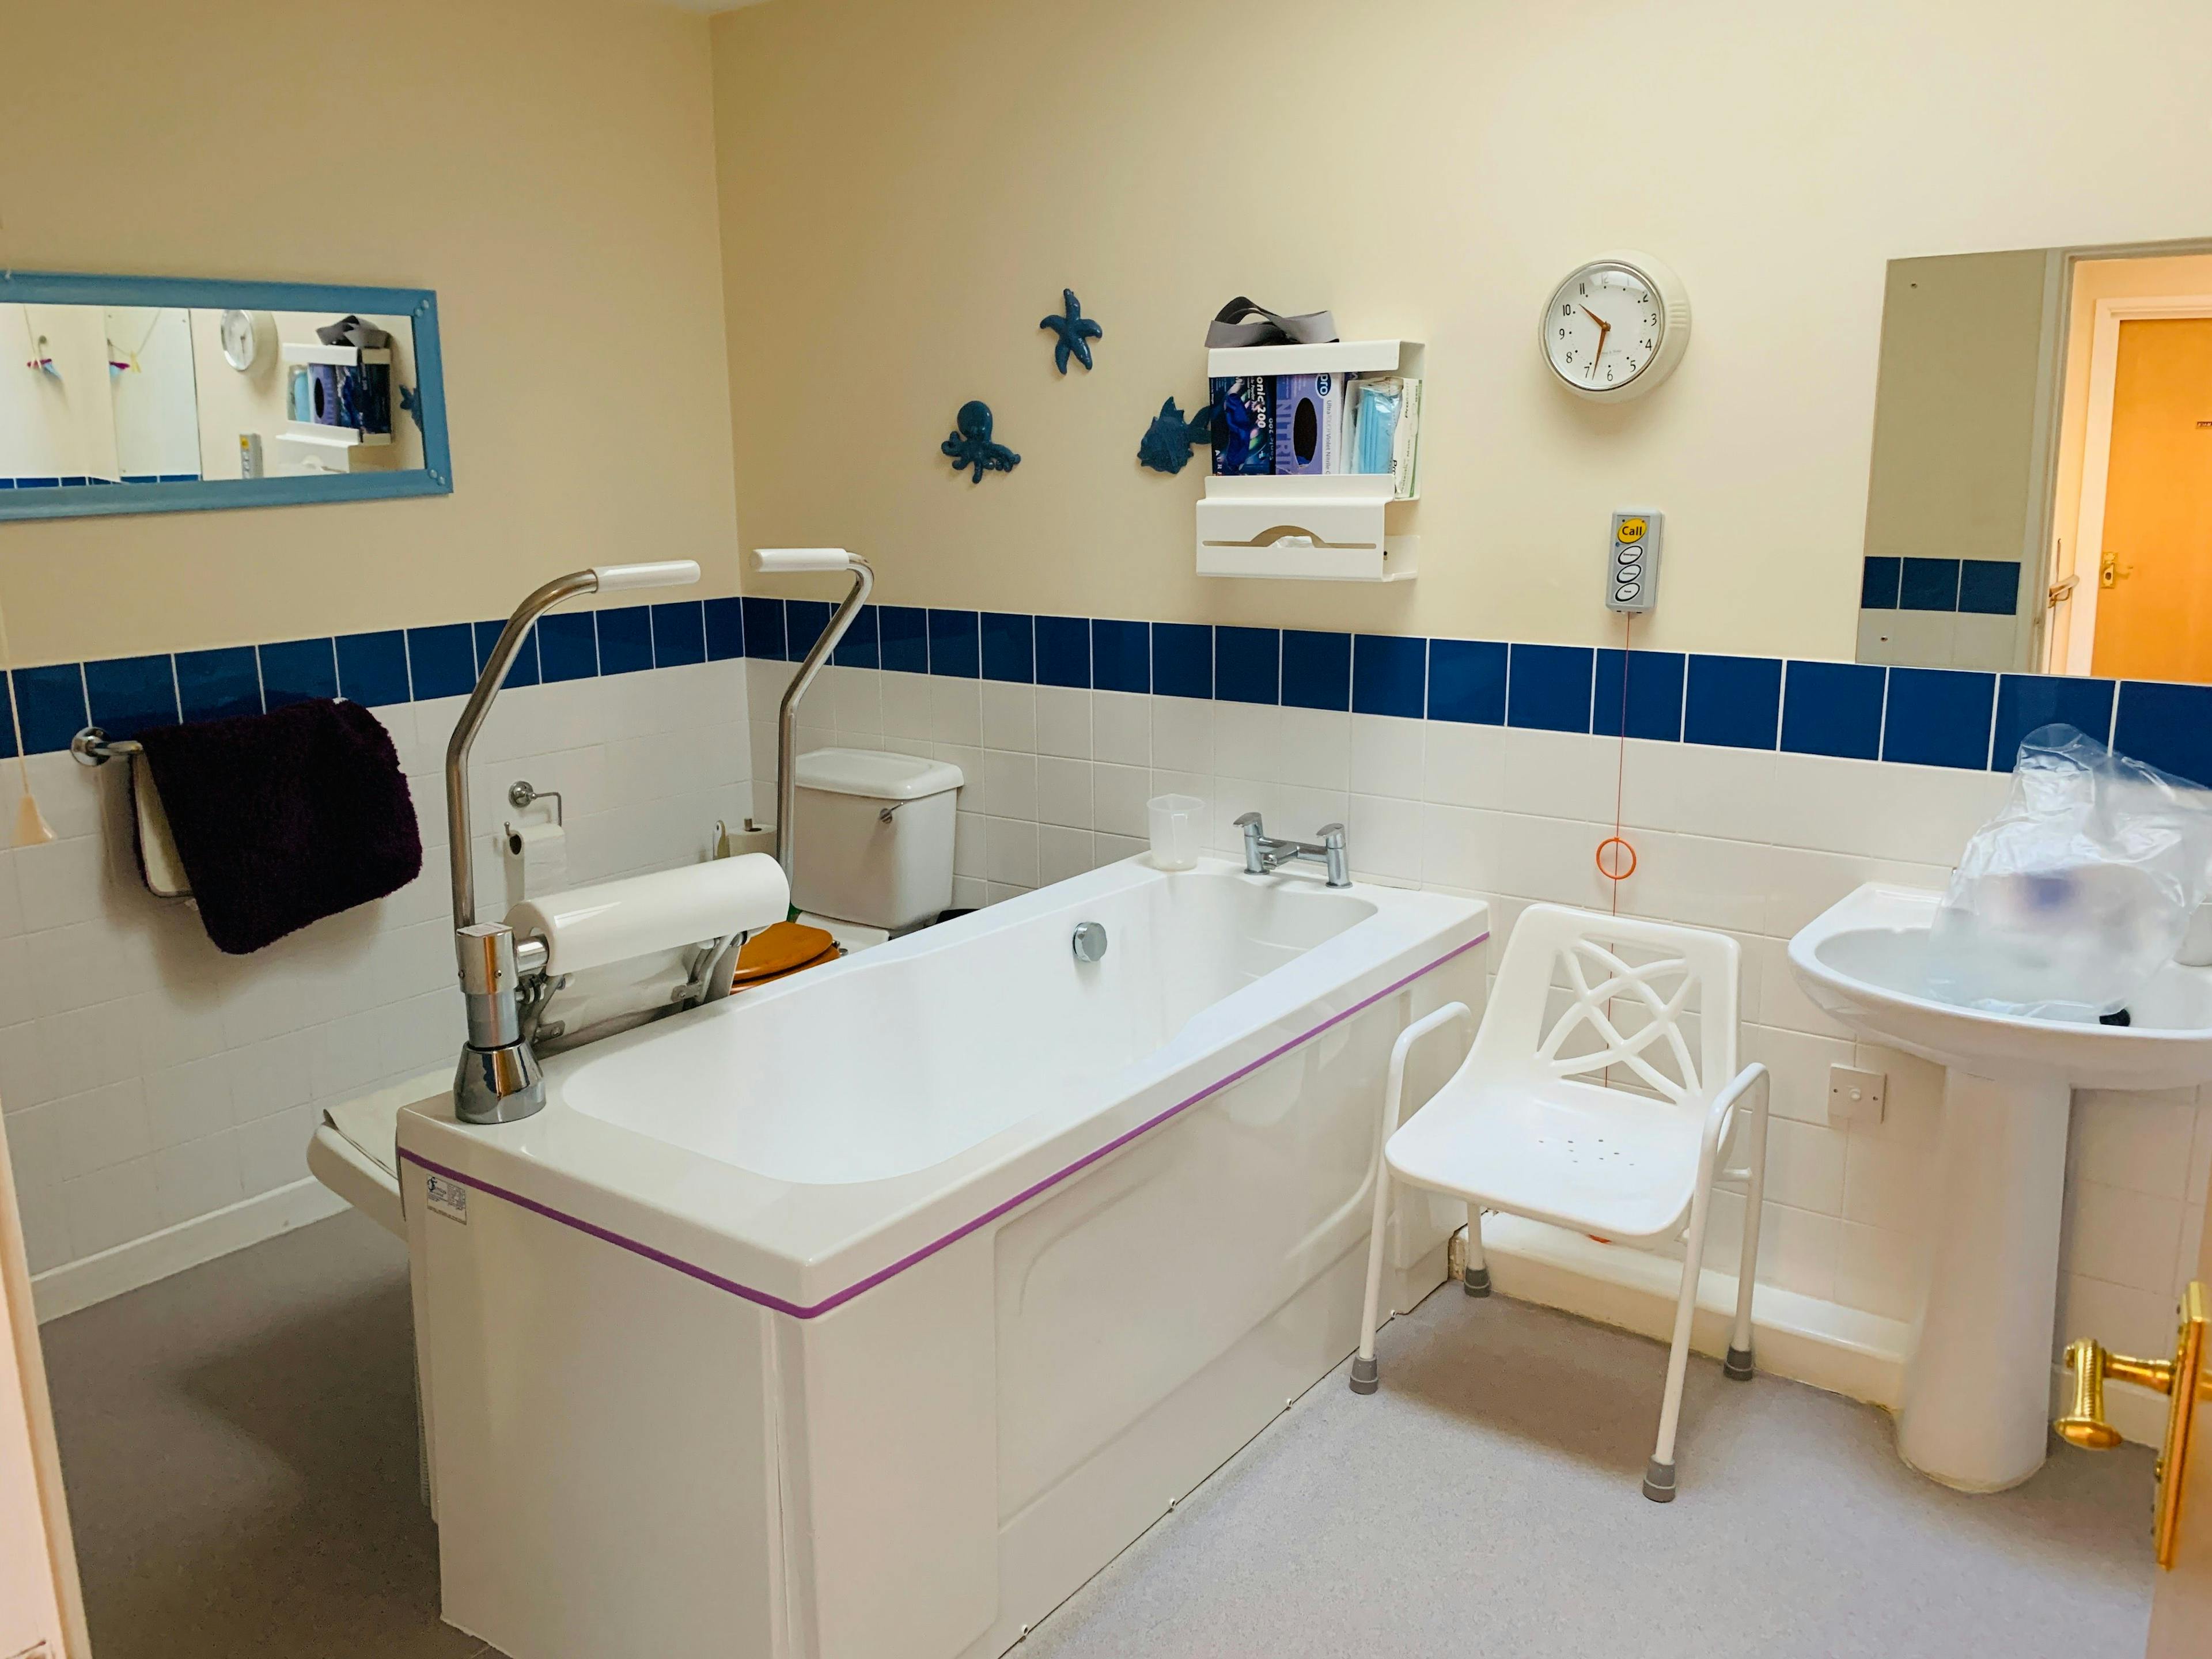 Bathroom at The Gables Care Home in Bristol, South West England 